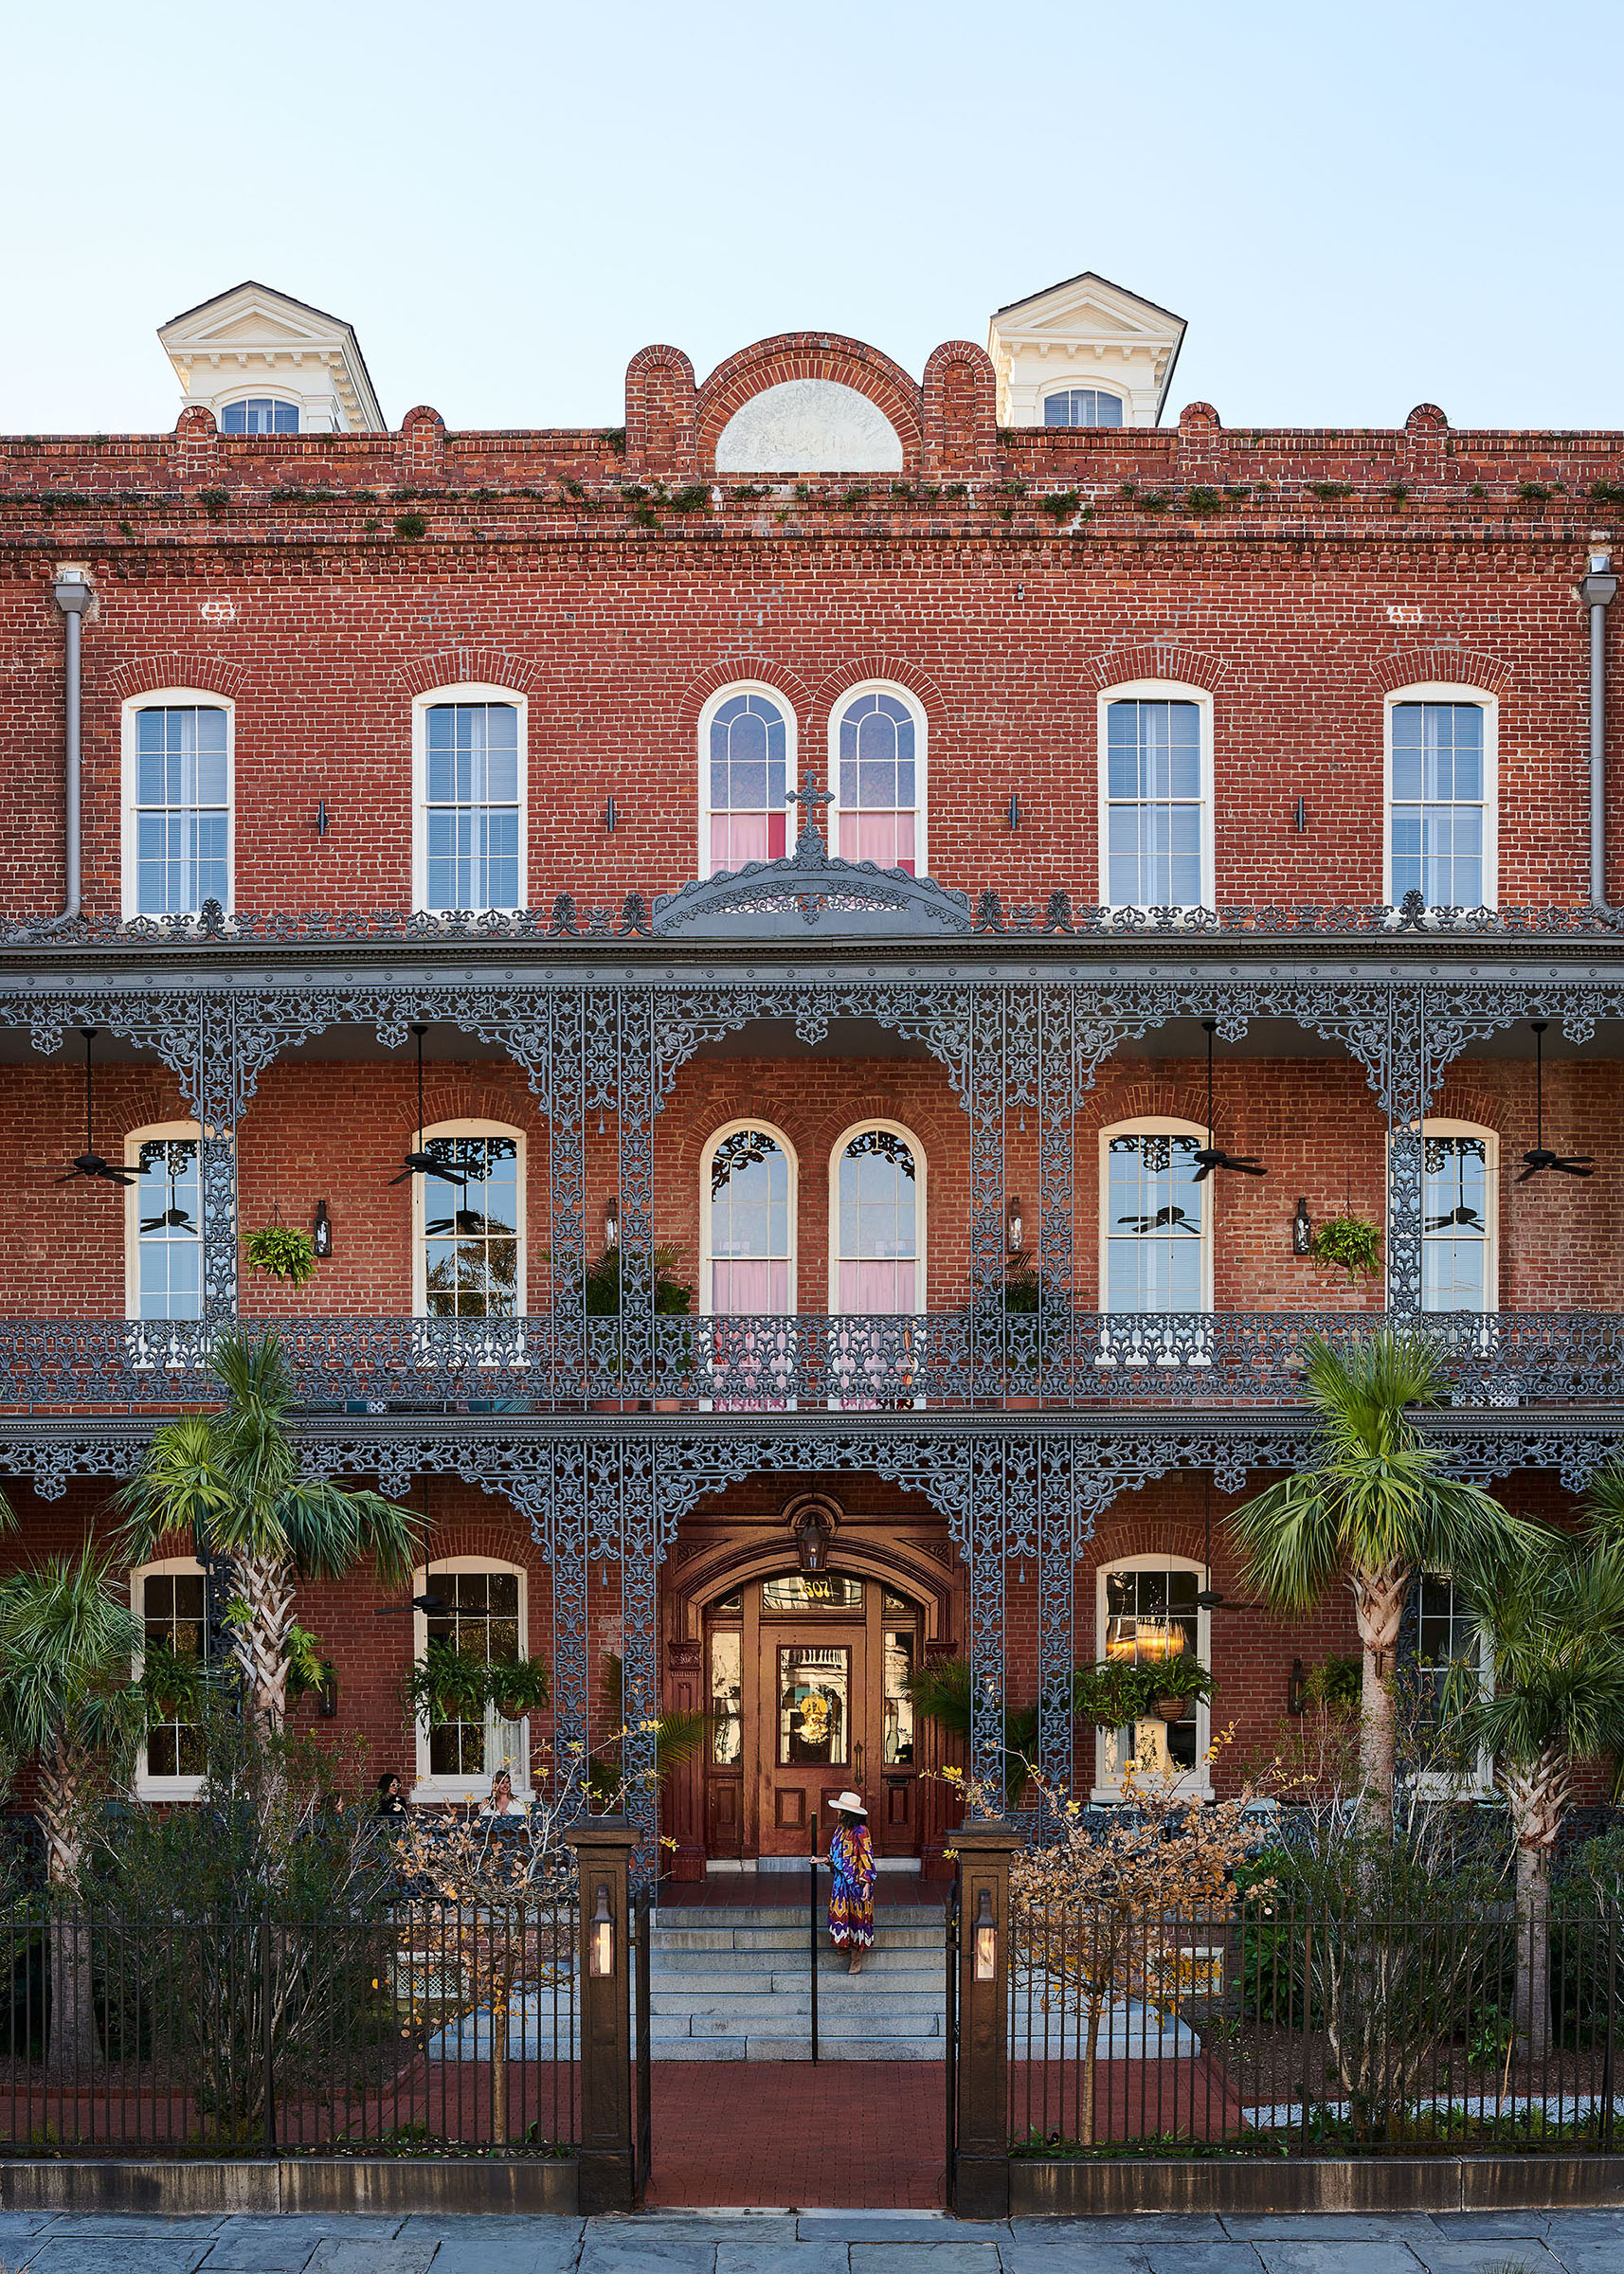 Wrought Iron exterior of Hotel St.Vincent created by by Alison Gootee photography